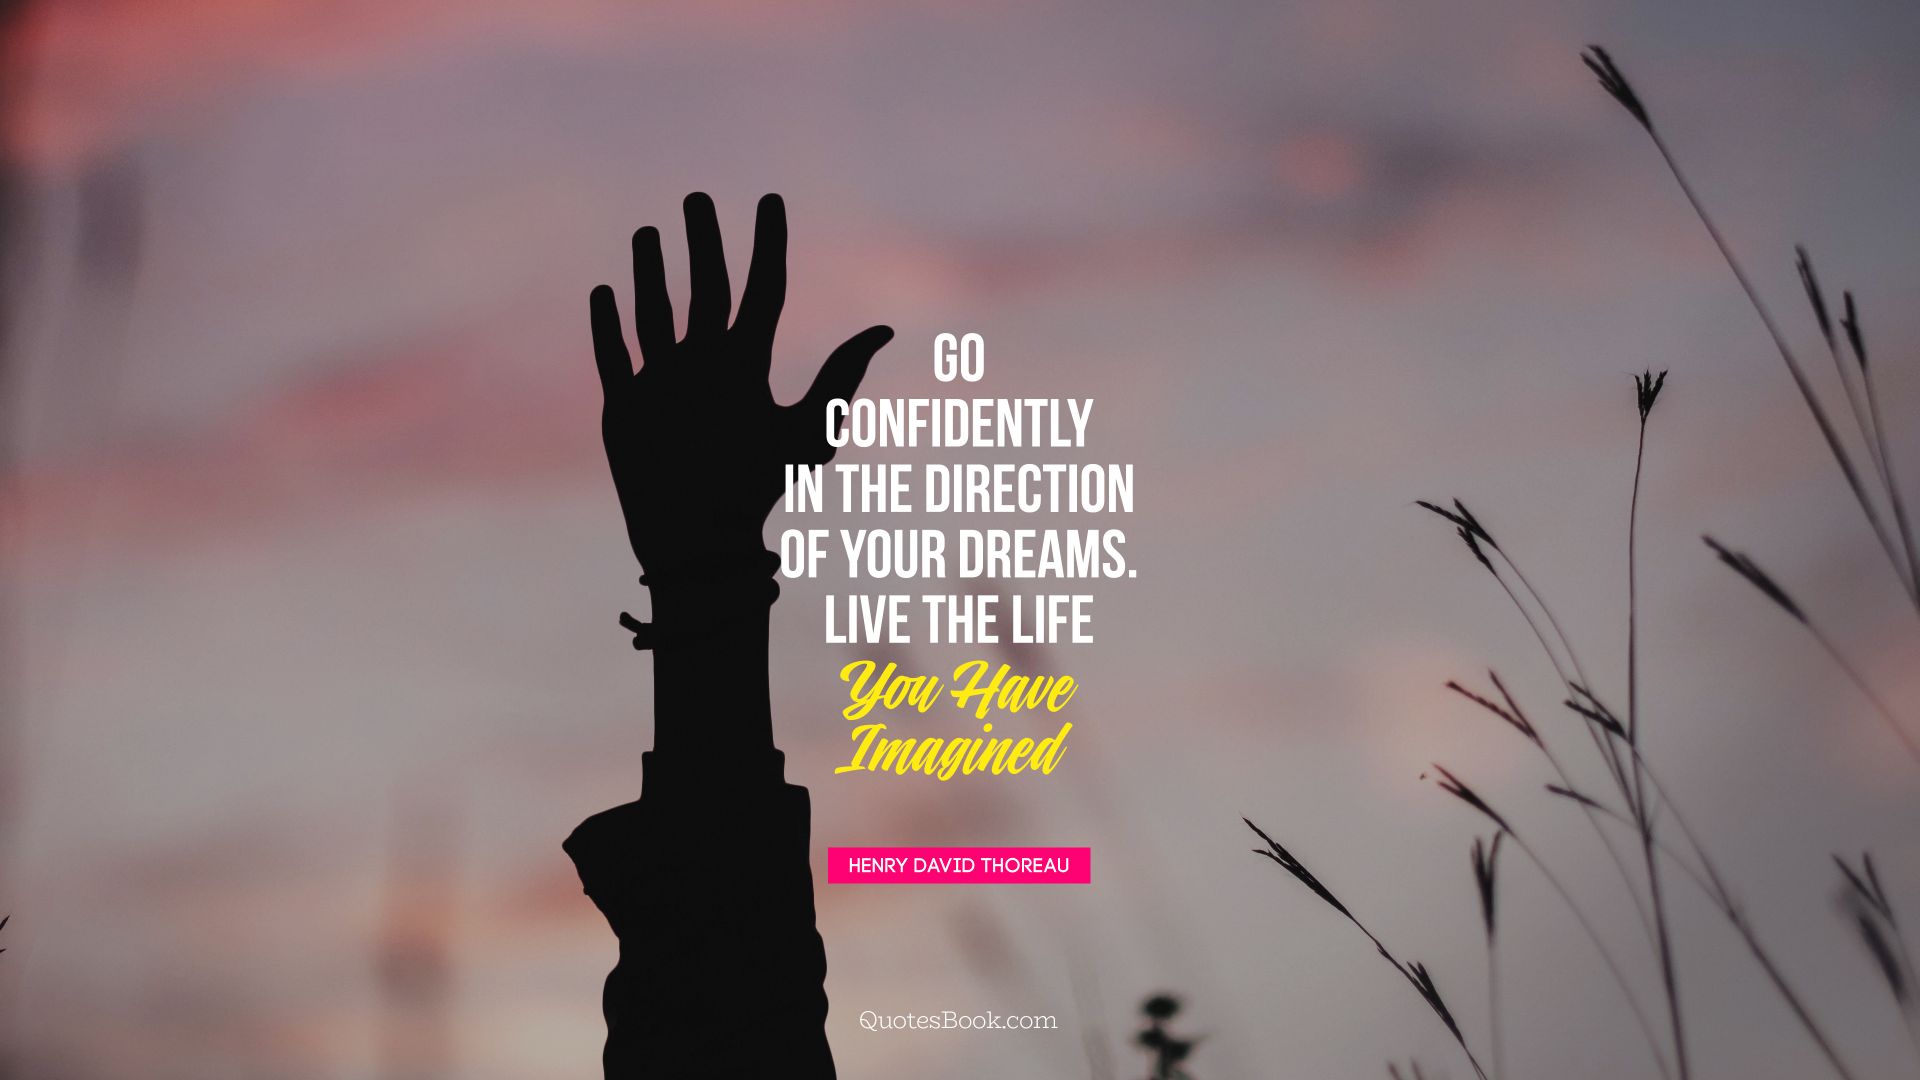 Go confidently in the direction of your dreams. Live the life  you have imagined. - Quote by Henry David Thoreau